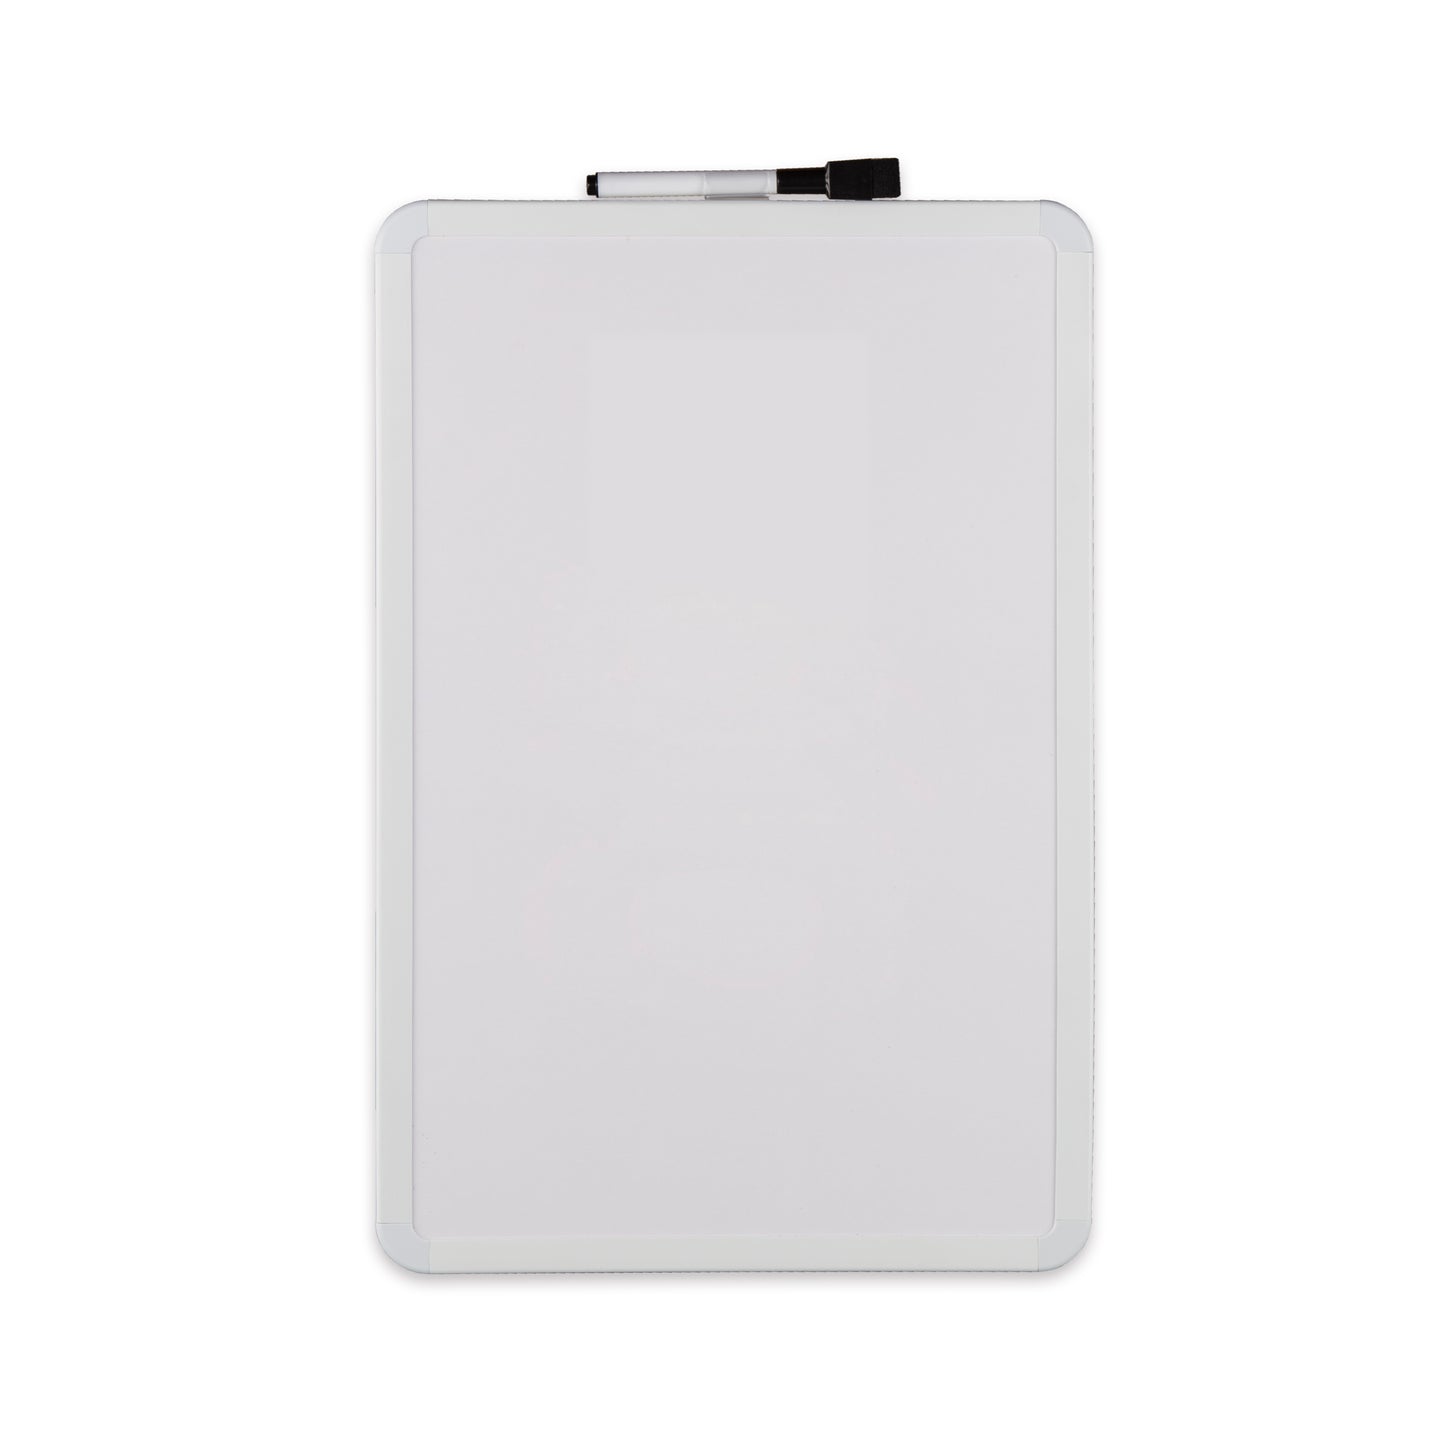 M03 dry erase memo tiny whiteboard, double-sided & single-sided 11x14 inches - Premium dry erase lapboard from Madic Whiteboard Factory - Madic Whiteboard Factory